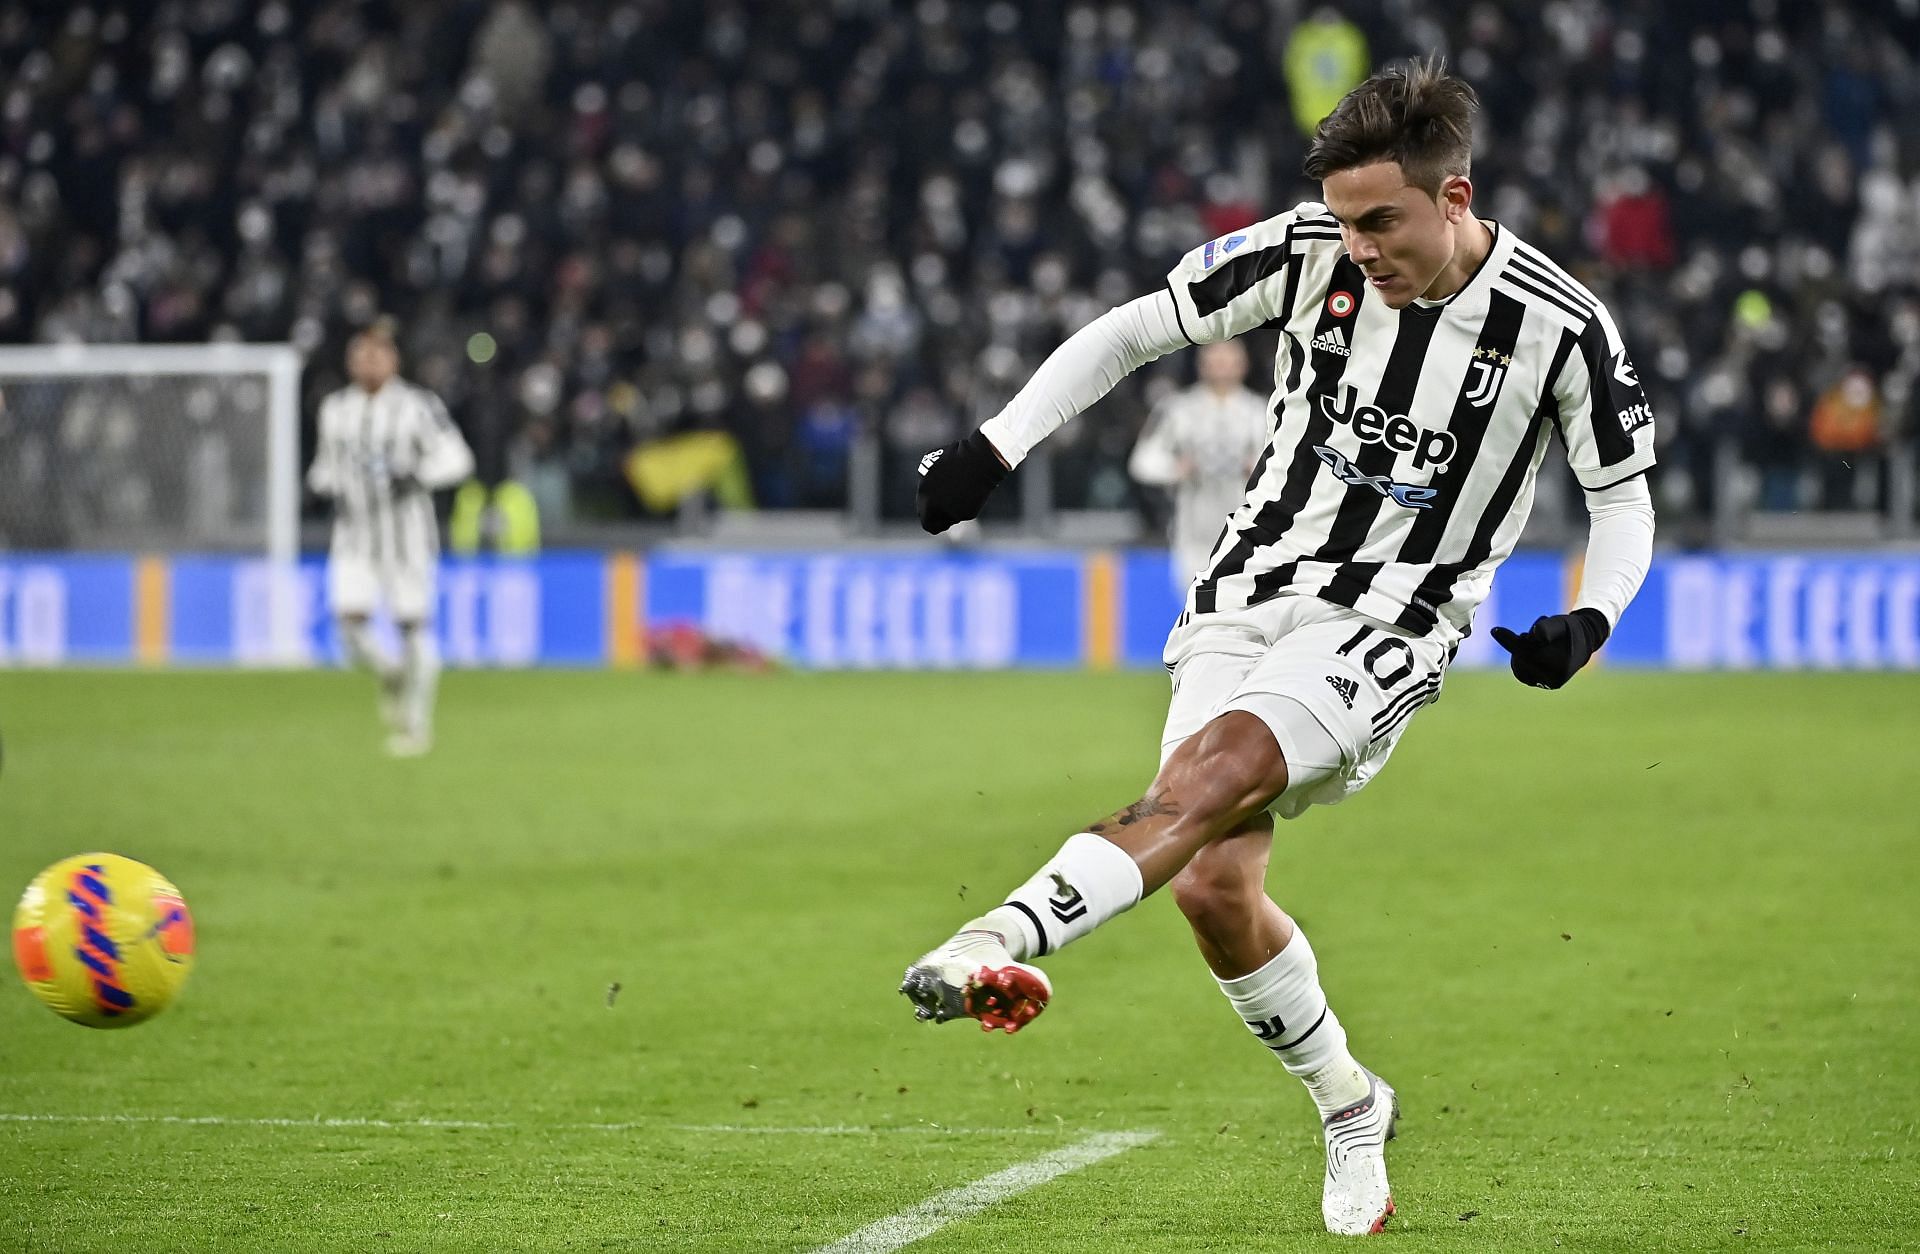 Paulo Dybala is one of the best-paid players in the Italian top flight at the moment.